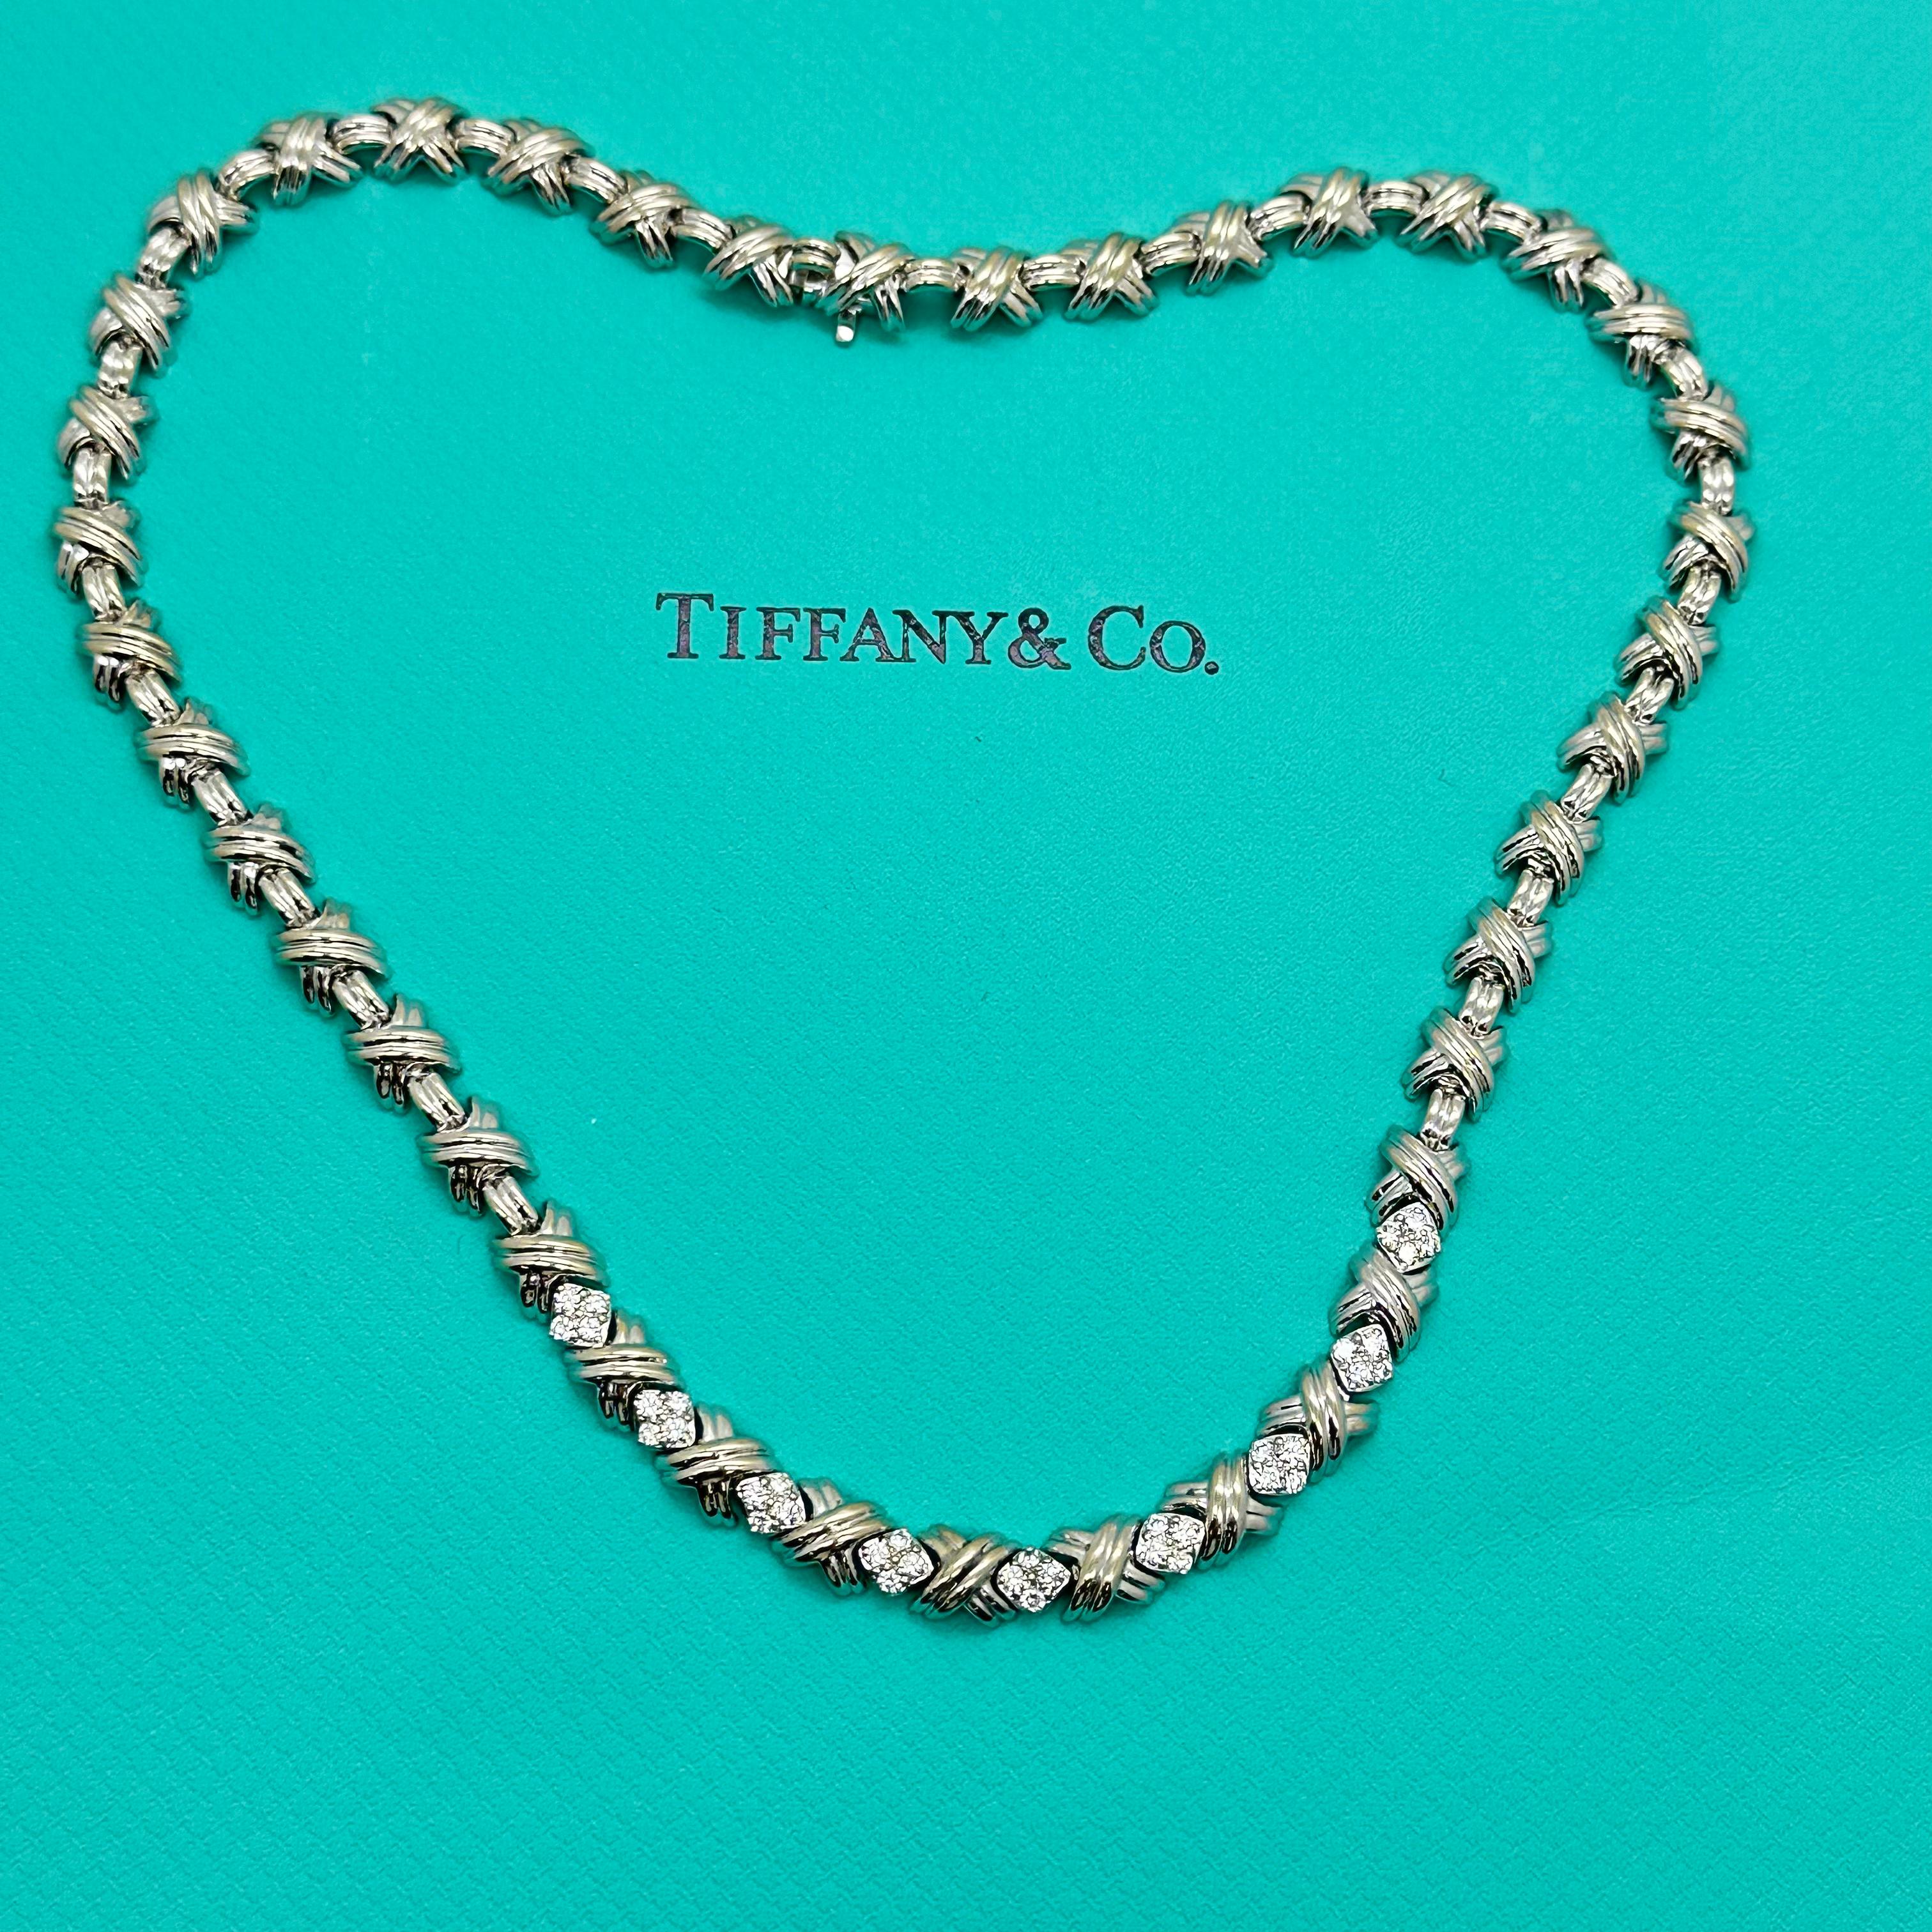 Tiffany & Co. Signature X Diamond Necklace in 18kt White Gold In Excellent Condition For Sale In San Diego, CA